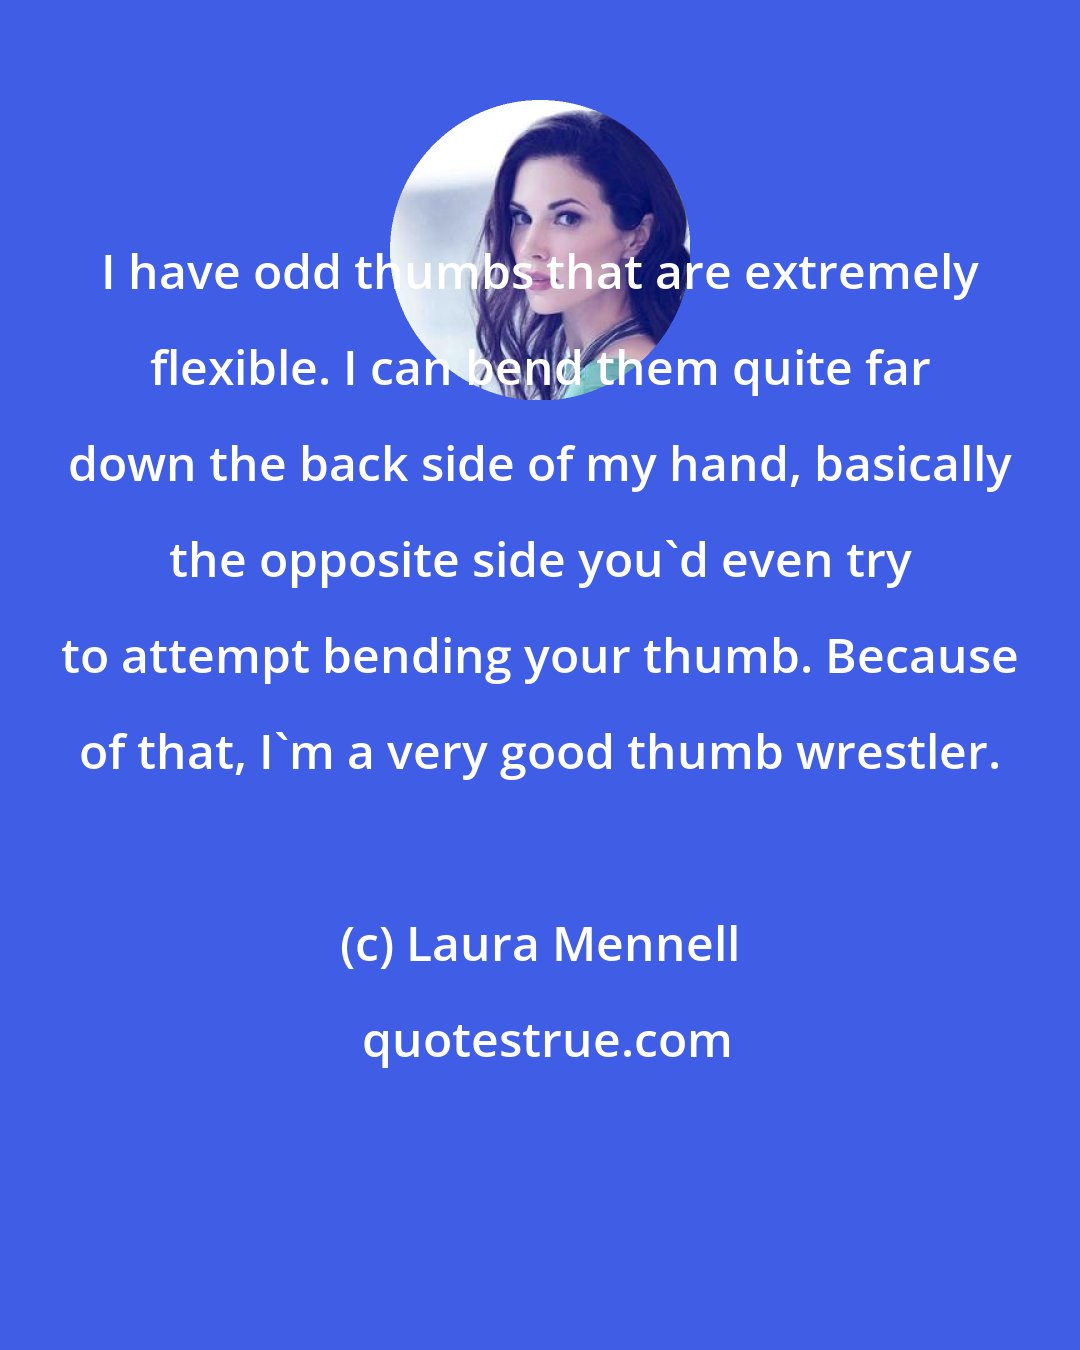 Laura Mennell: I have odd thumbs that are extremely flexible. I can bend them quite far down the back side of my hand, basically the opposite side you'd even try to attempt bending your thumb. Because of that, I'm a very good thumb wrestler.